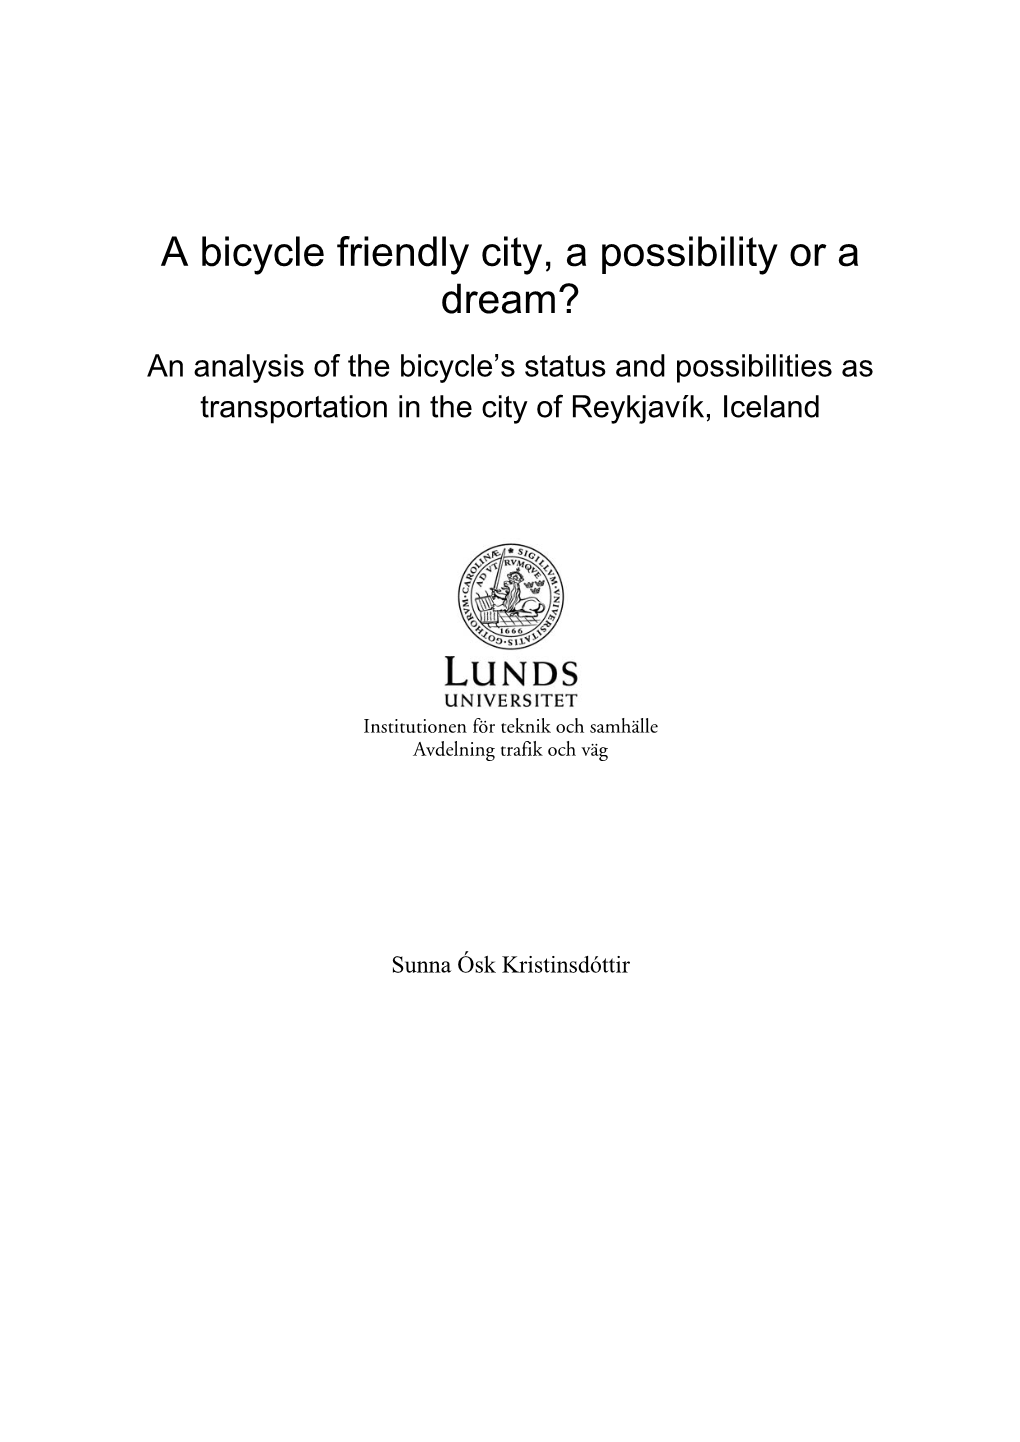 A Bicycle Friendly City, a Possibility Or a Dream? an Analysis of the Bicycle’S Status and Possibilities As Transportation in the City of Reykjavík, Iceland